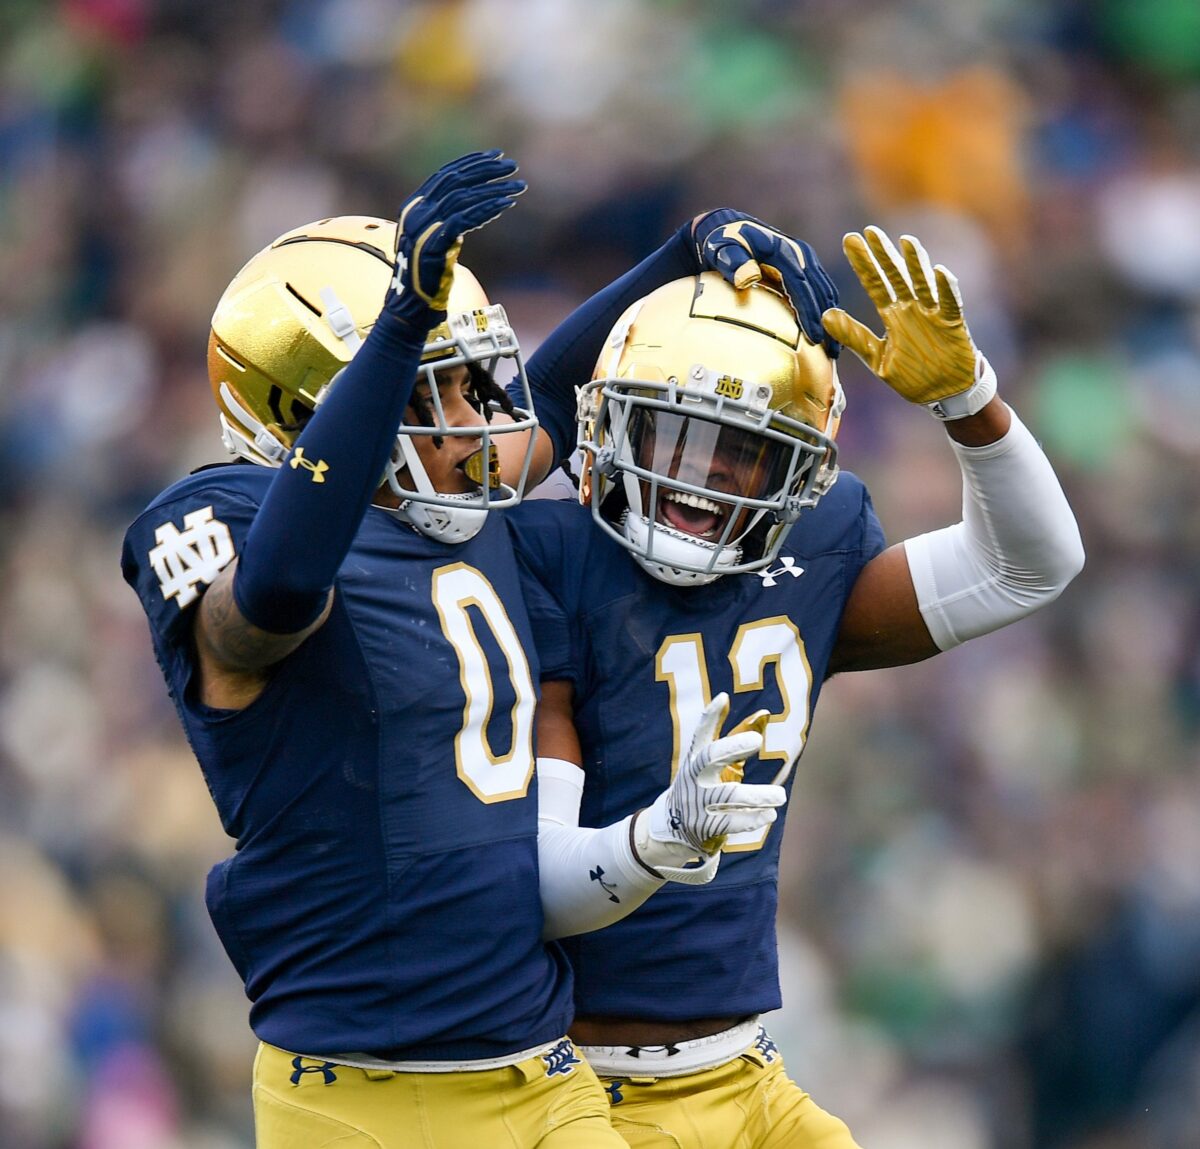 Watch: Every interception by Notre Dame football against Pittsburgh